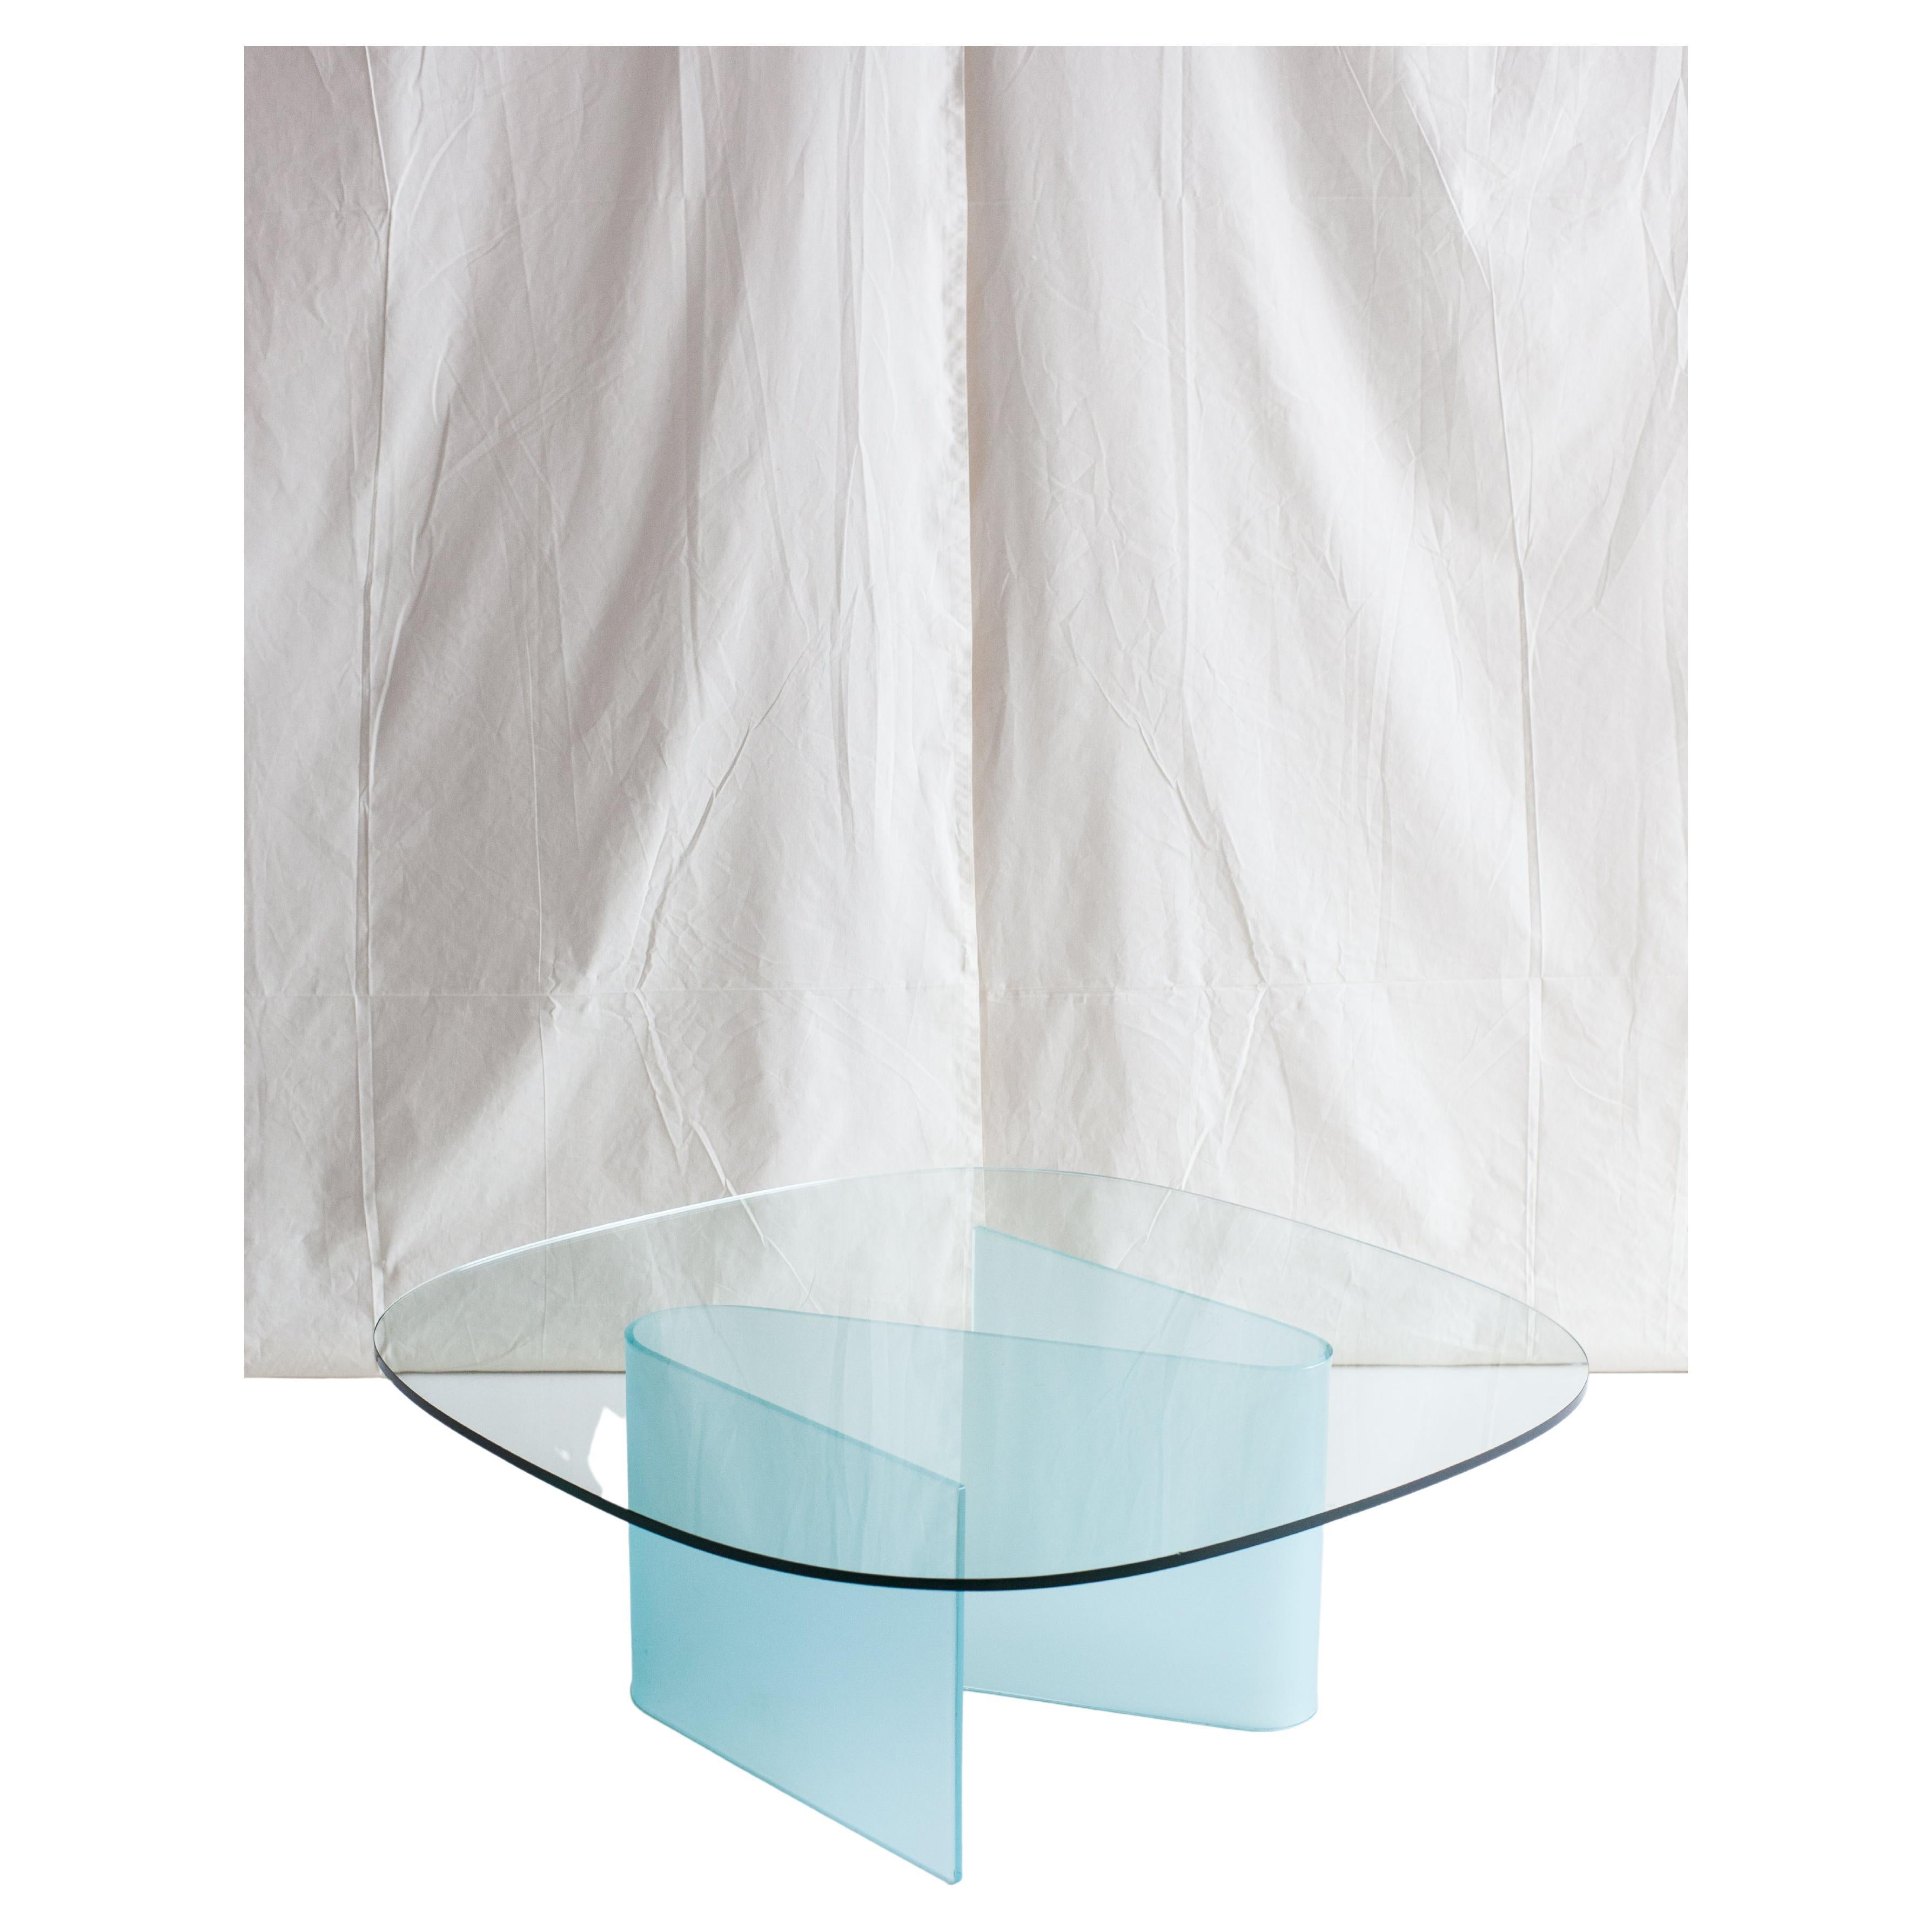 Beautiful glass coffee table with s-shaped frosted glass base.

We have another glass beauty for you. One that will blend in easily with any environment, while still drawing attention to itself given its unique design. The two types of glass make